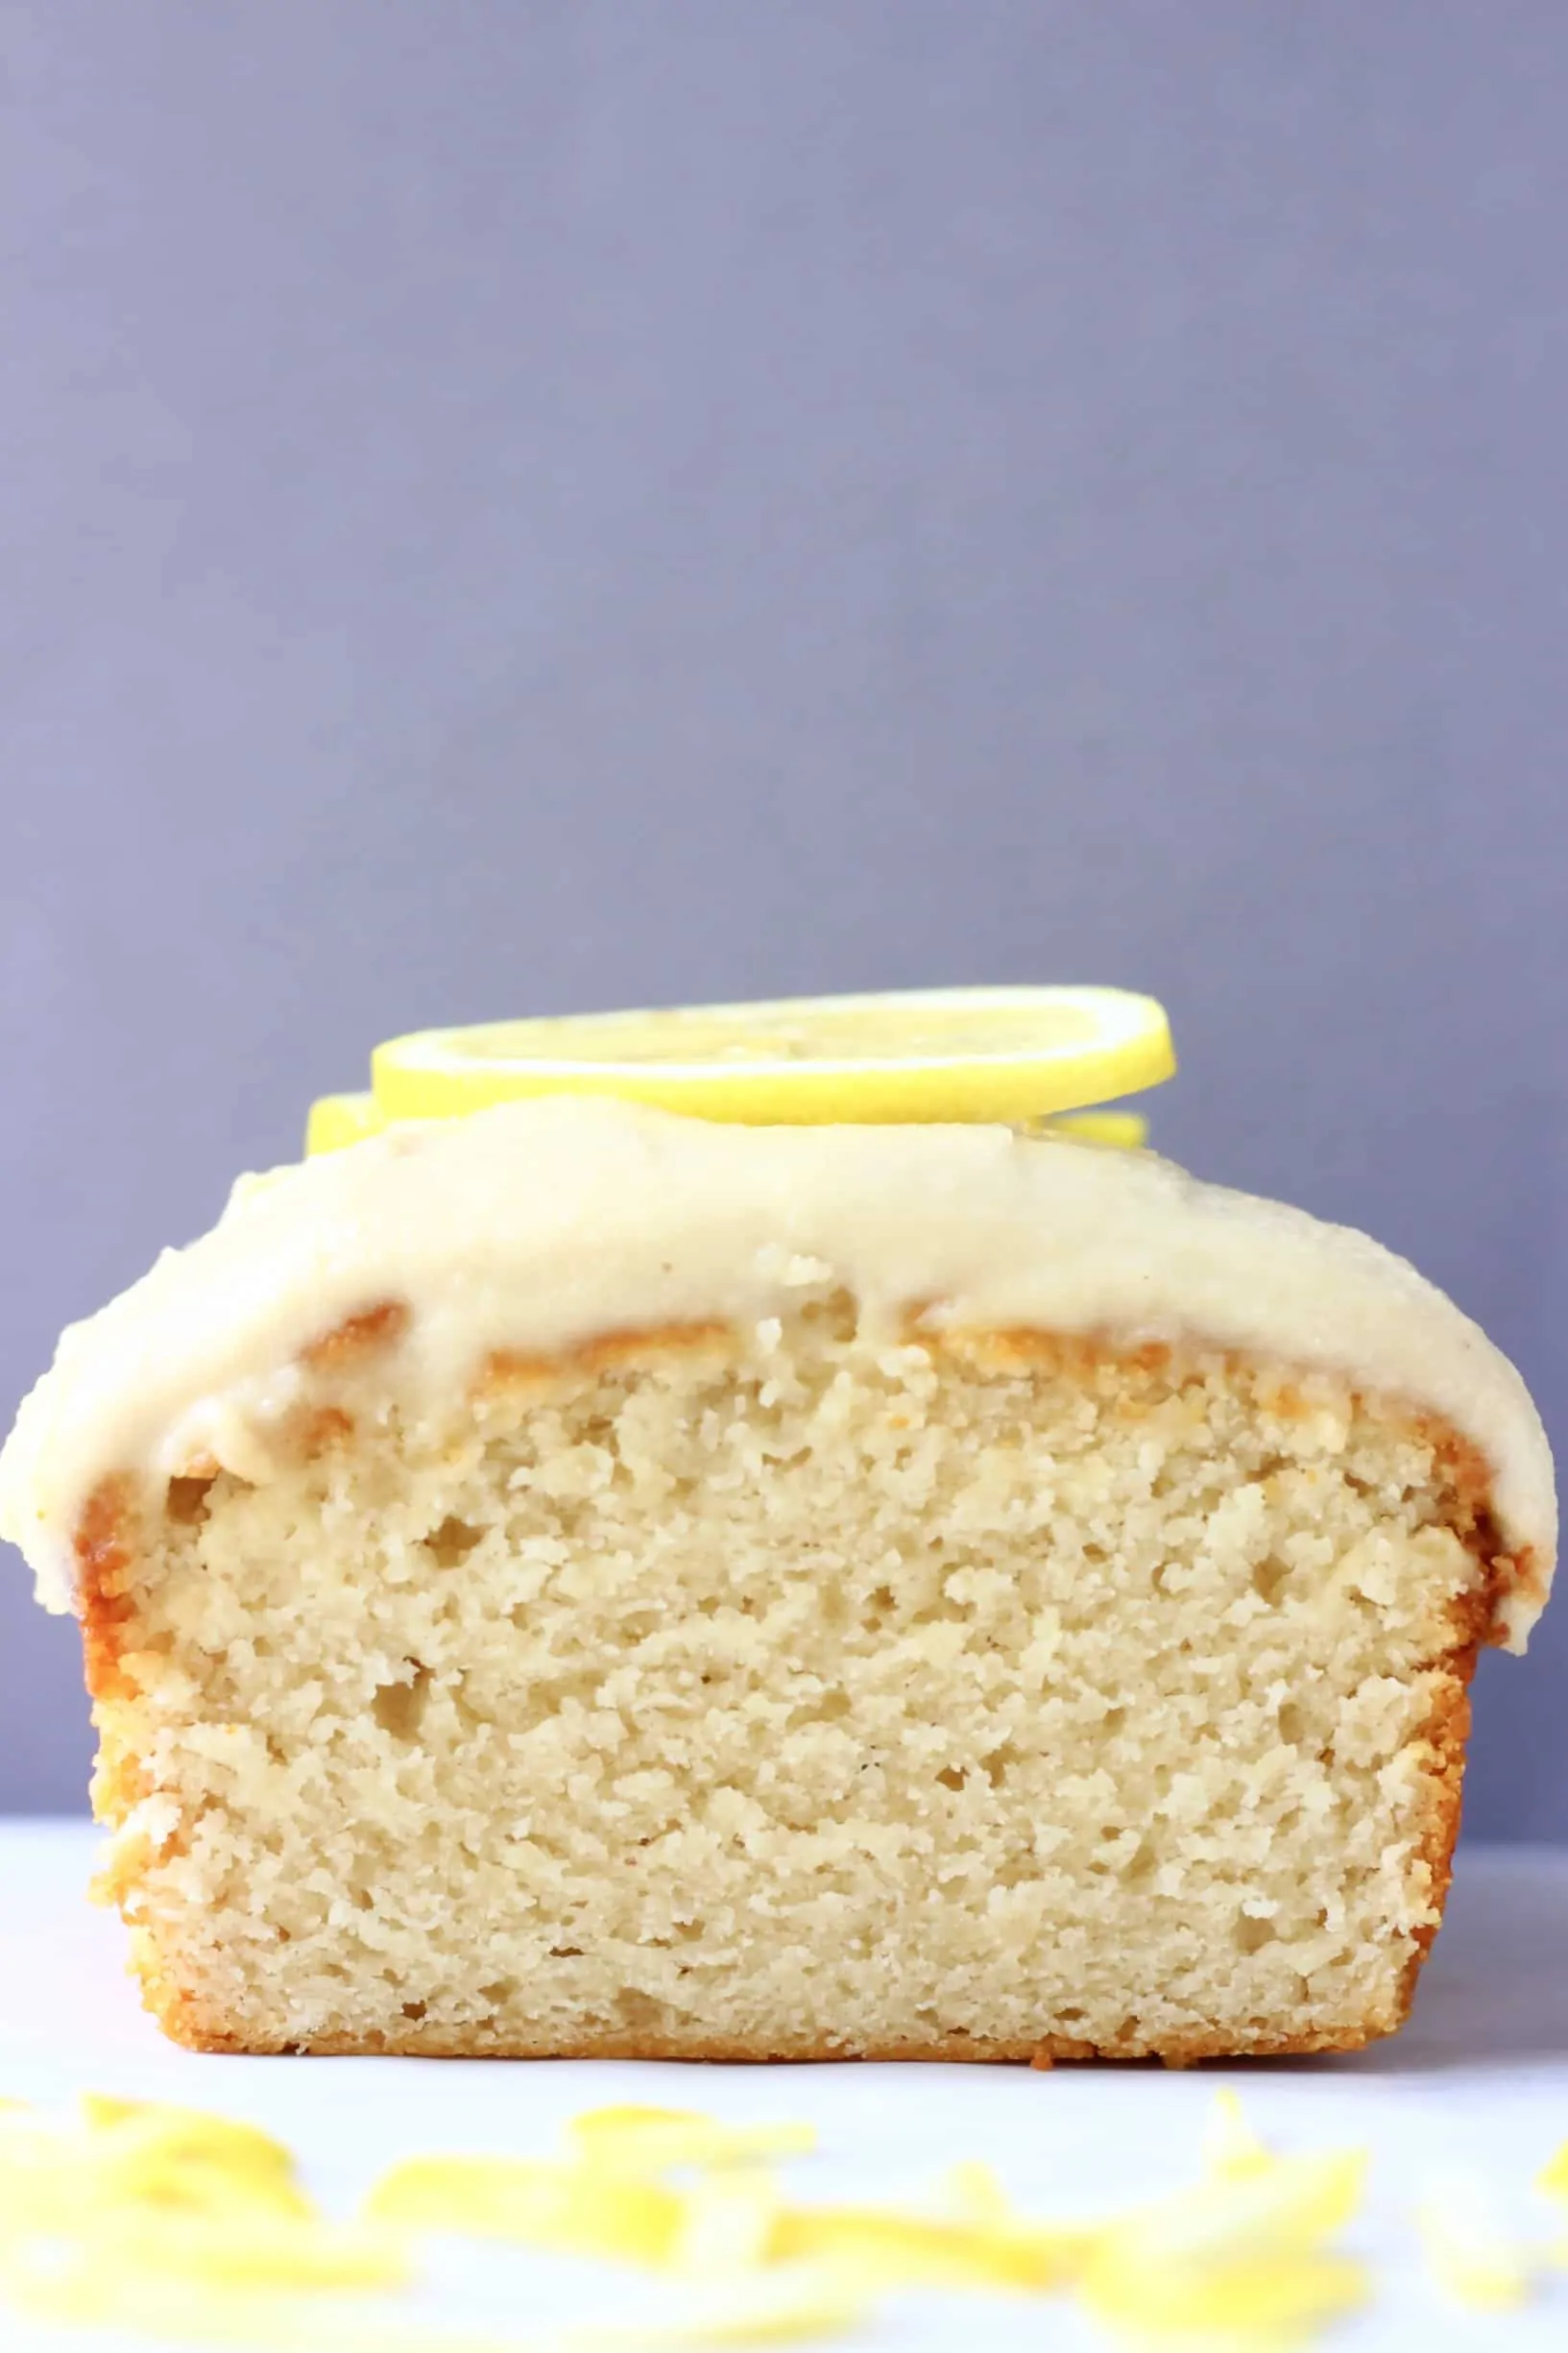 A sliced loaf of gluten-free vegan lemon bread topped with frosting and lemon slices